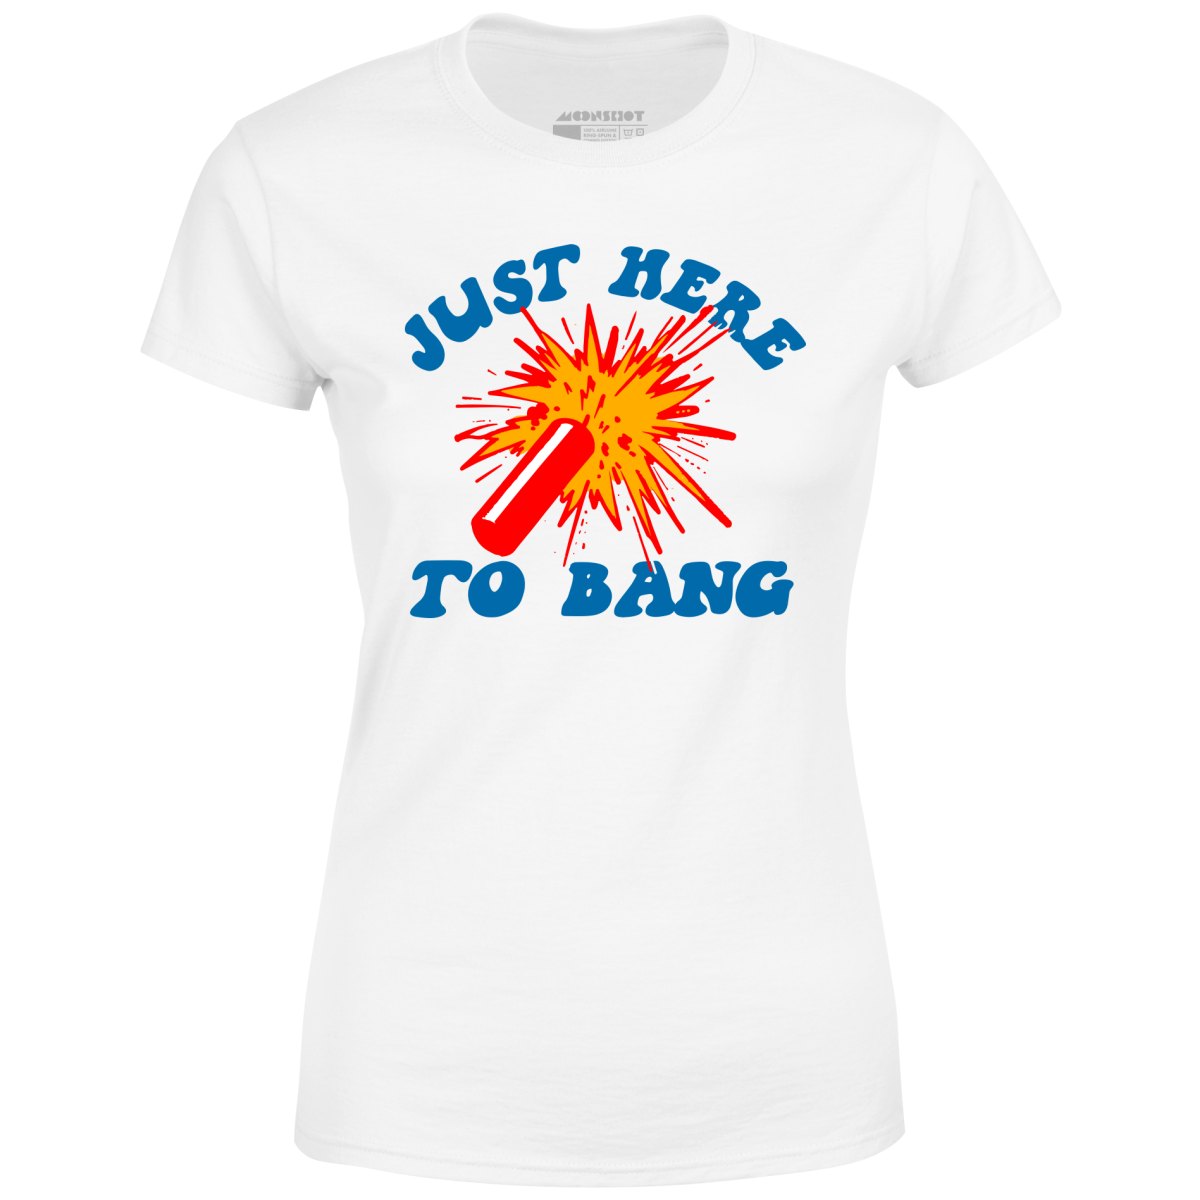 Just Here to Bang! - Women's T-Shirt